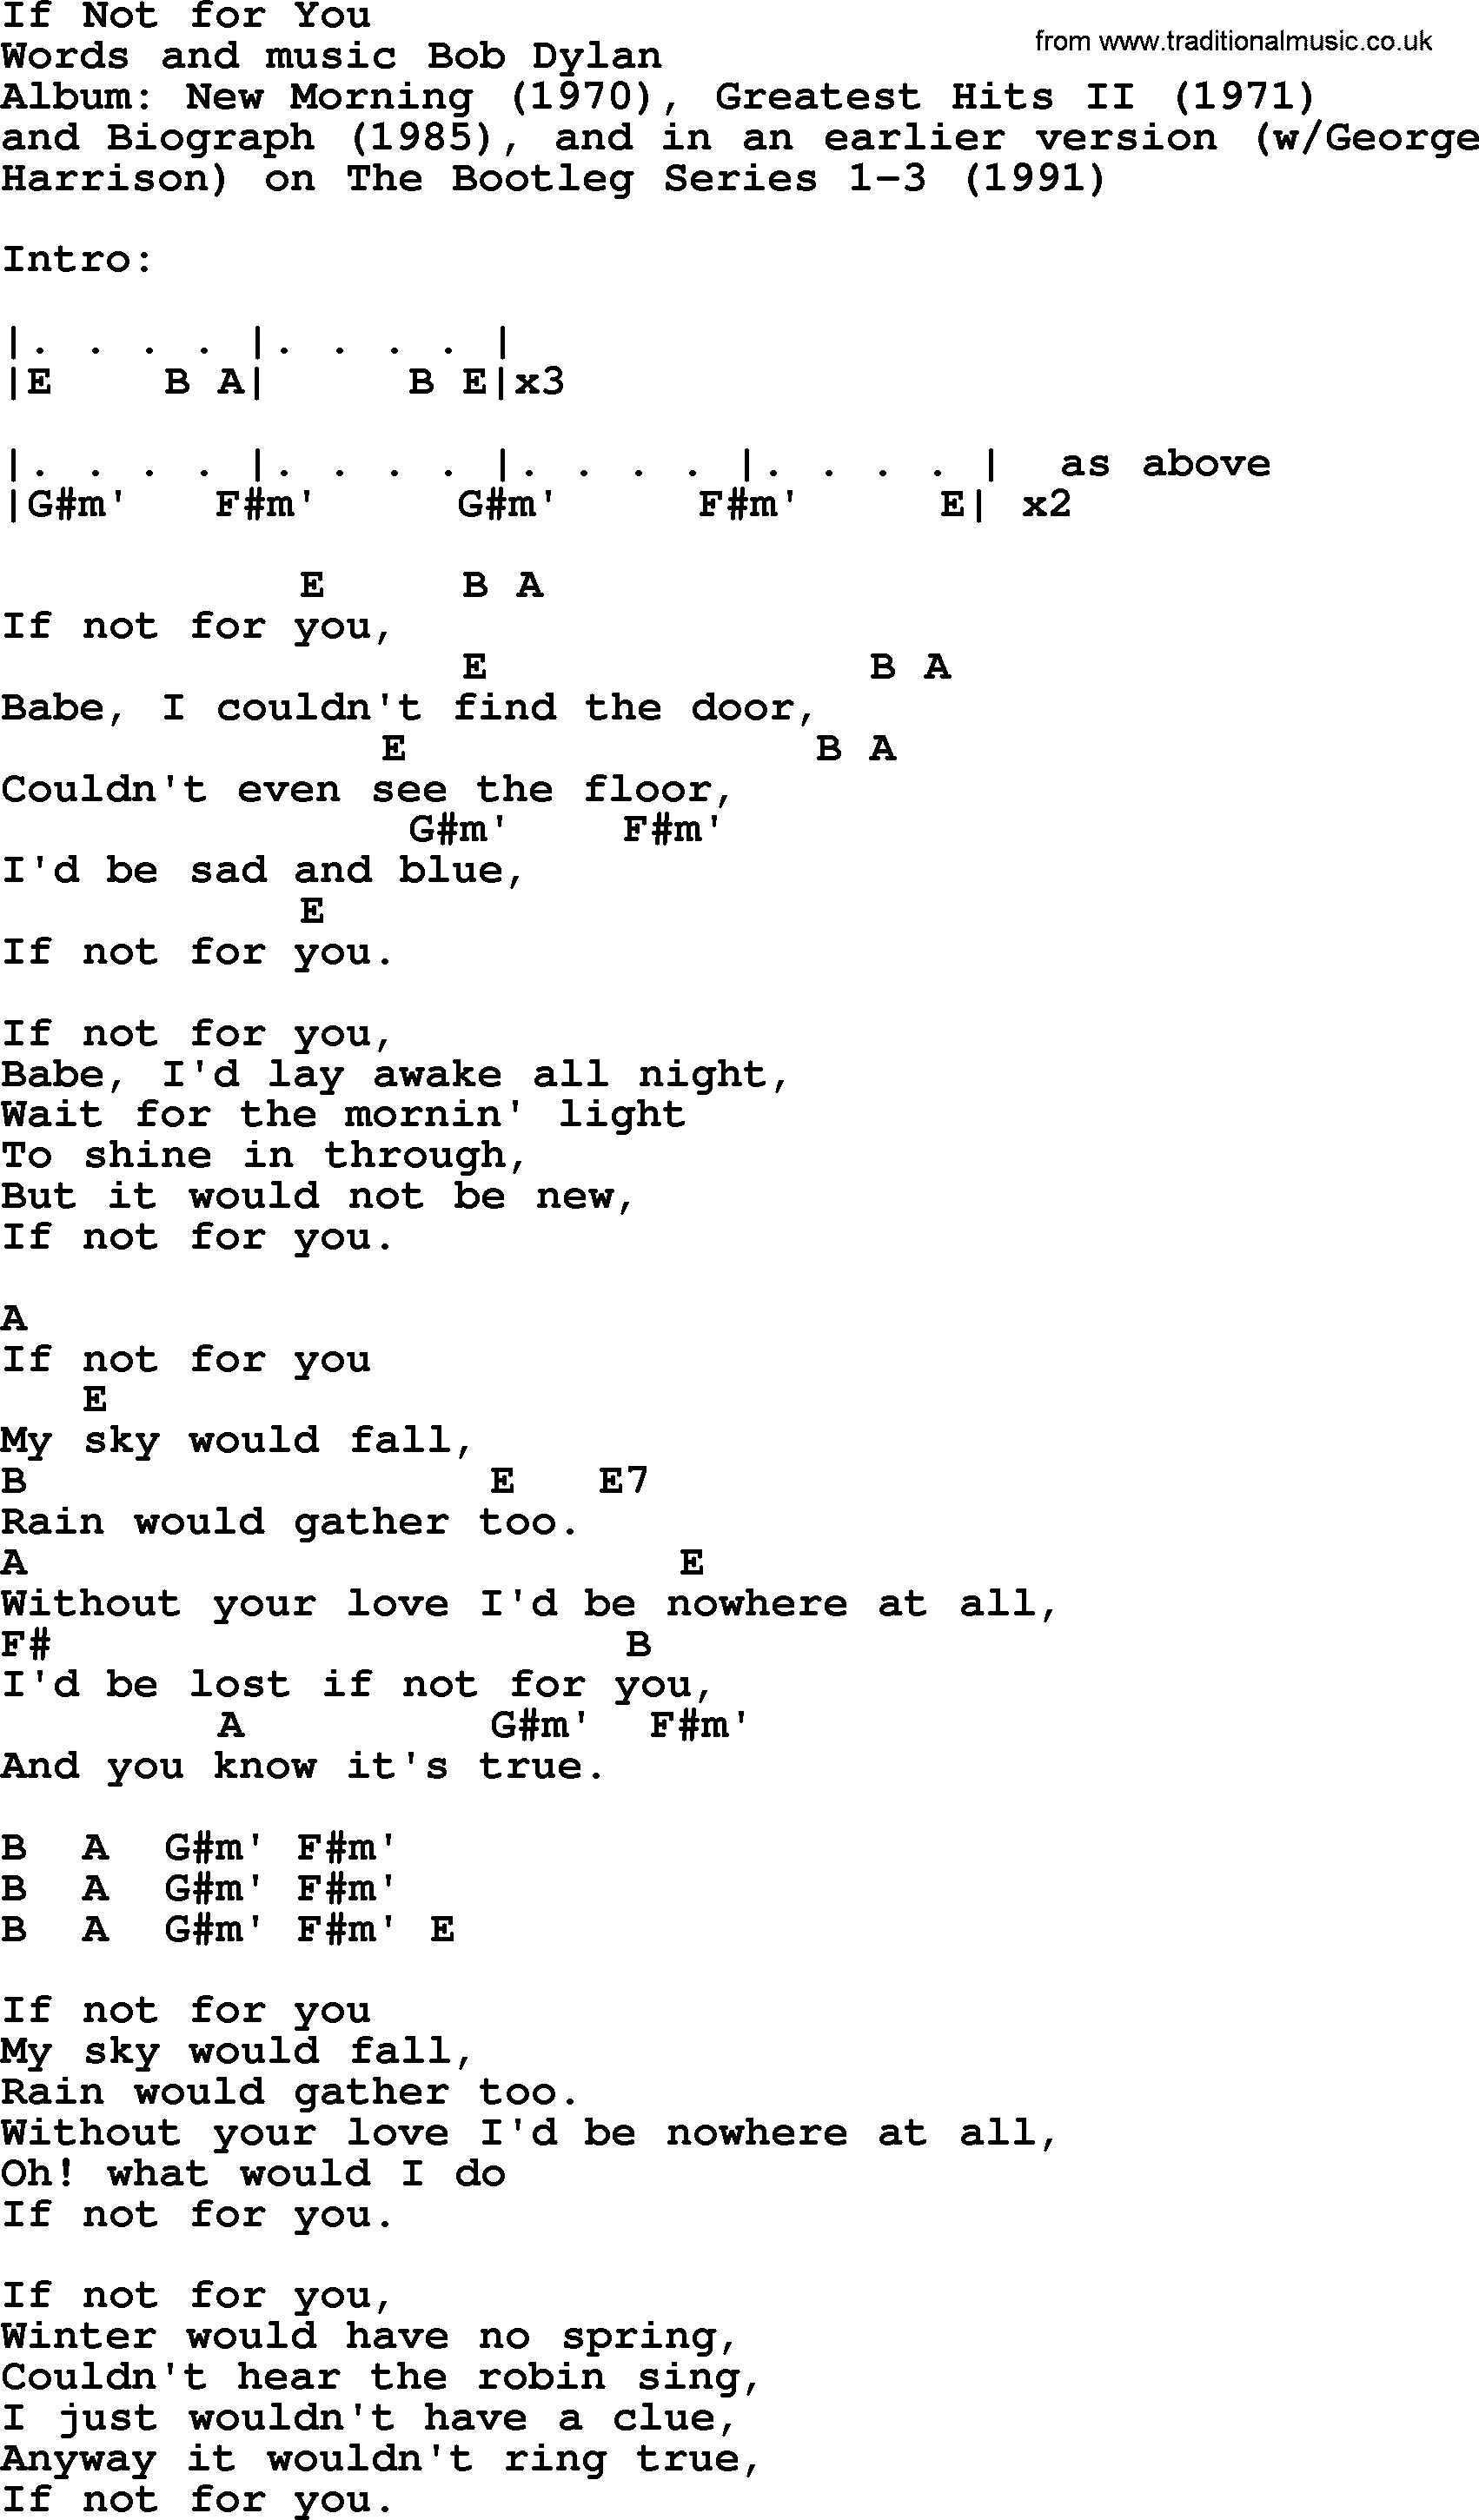 Bob Dylan song, lyrics with chords - If Not for You